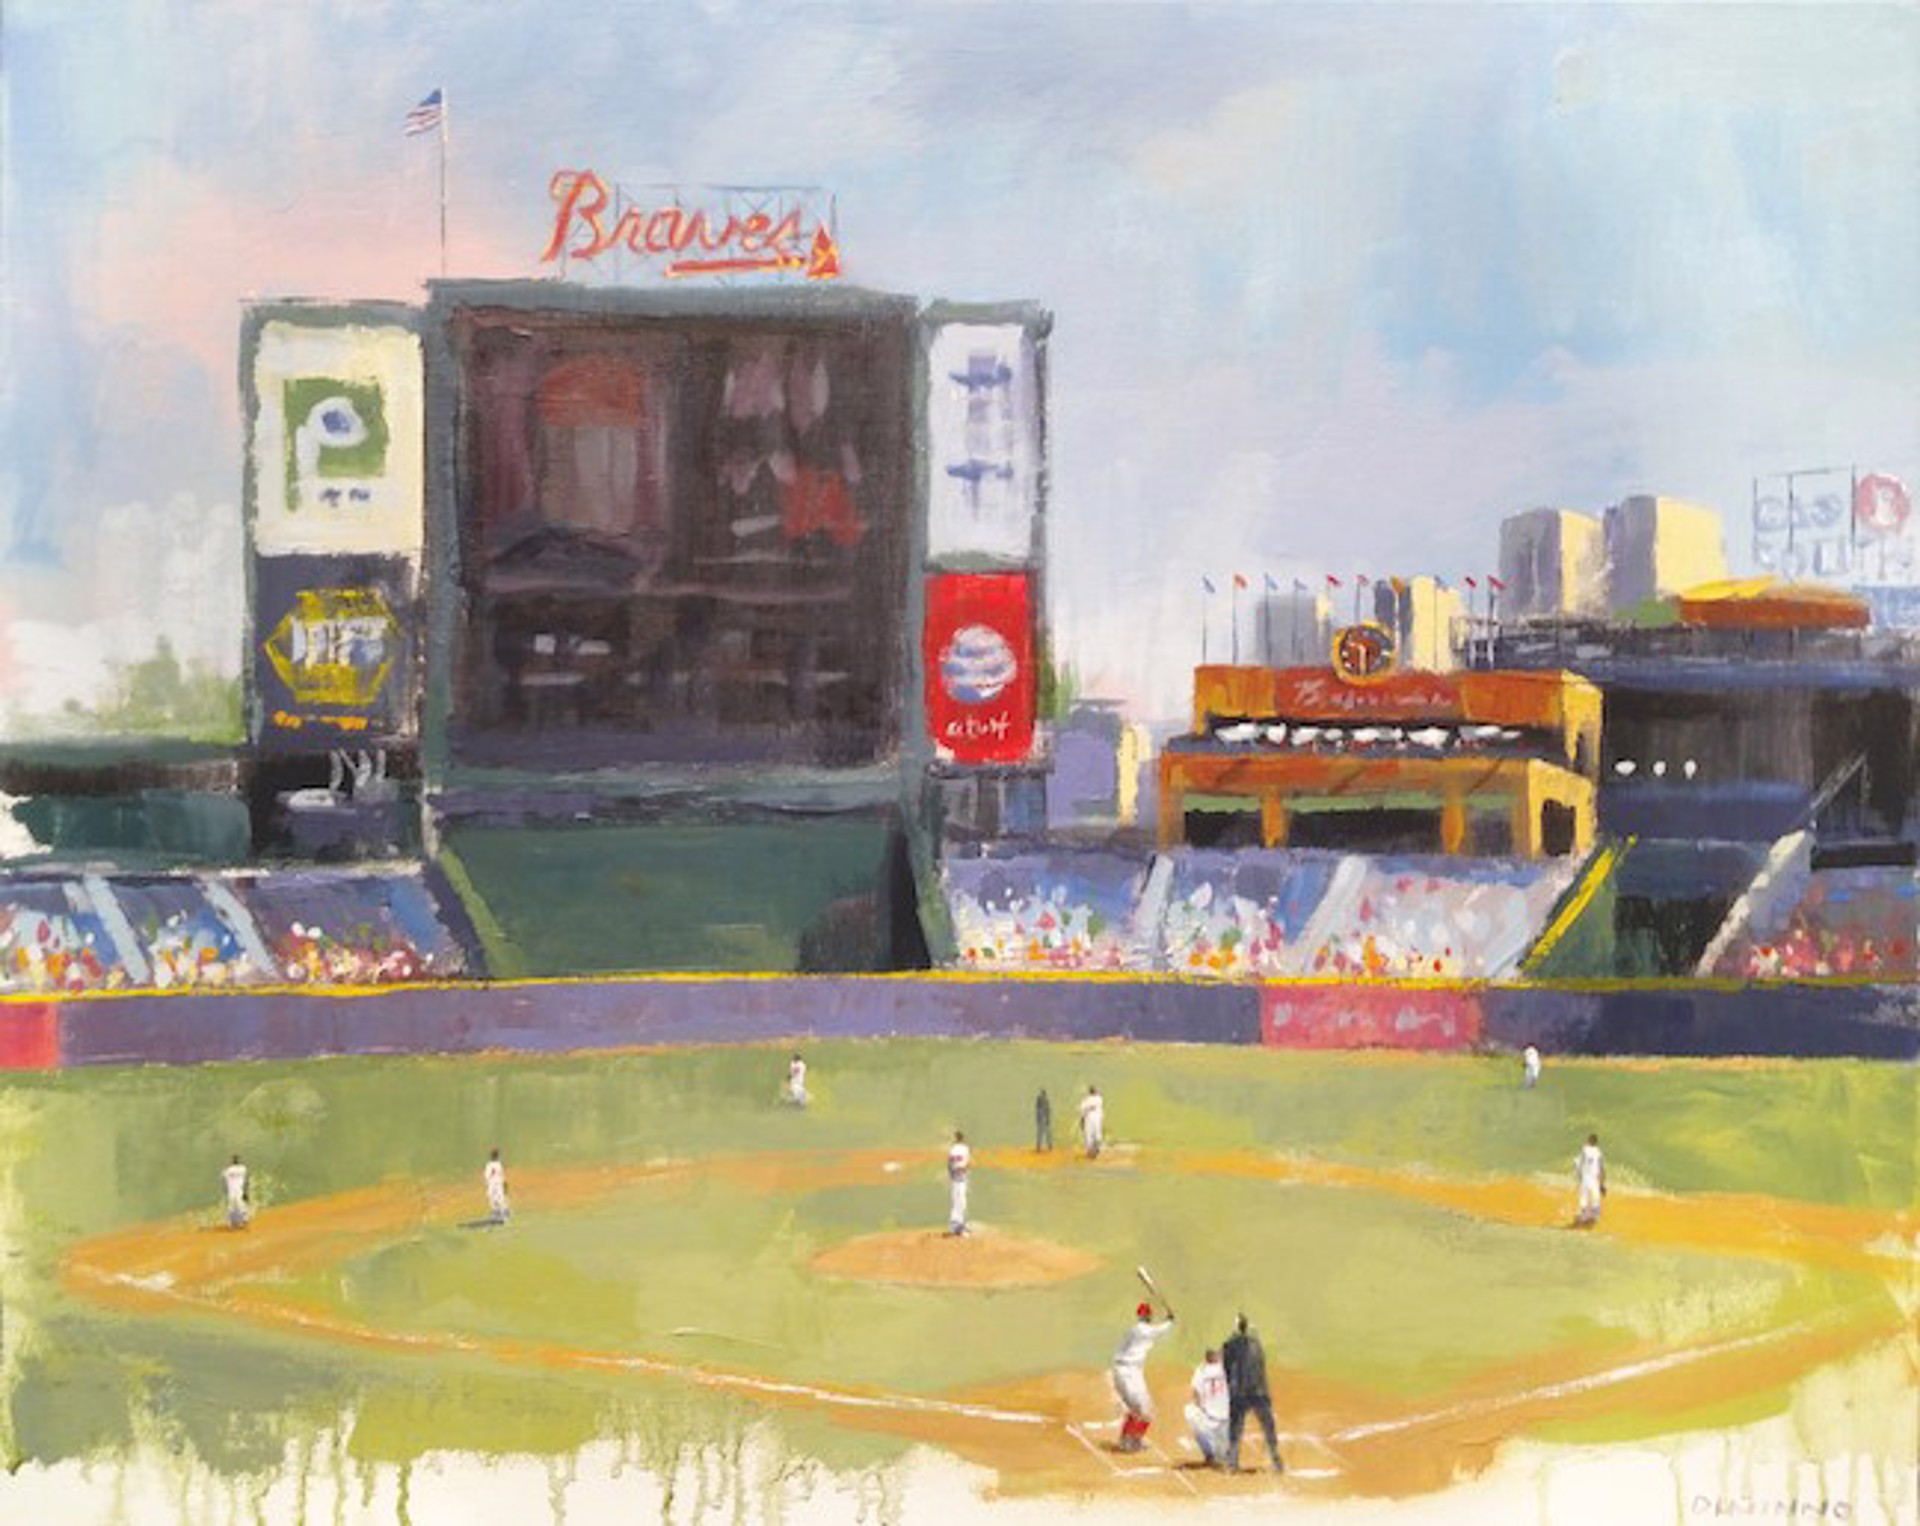 Turner Field (Home of the Braves) by Steve Dininno